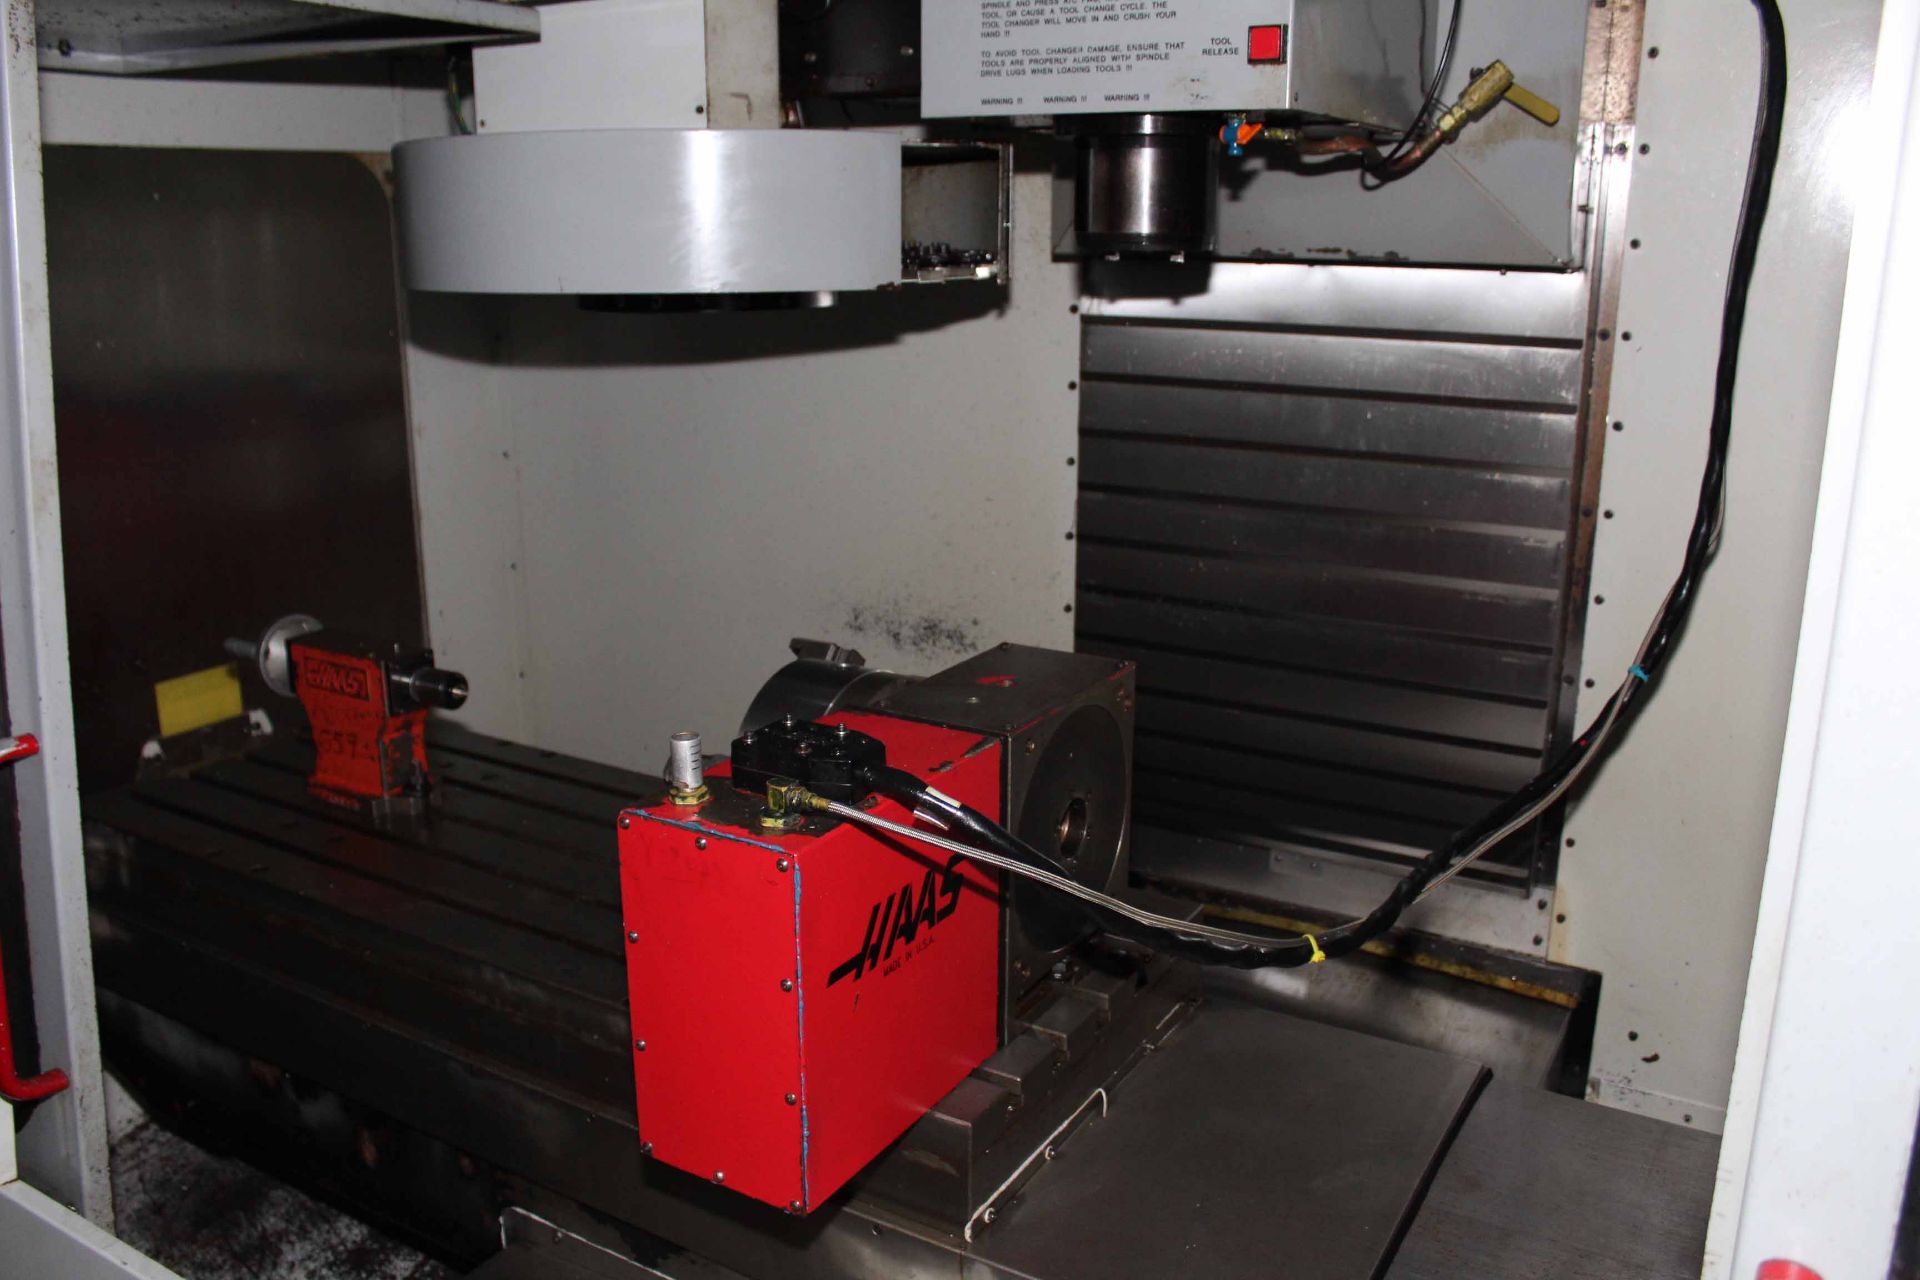 4-AXIS VERTICAL MACHINING CENTER, HAAS MDL. VF-3, new 3/1997, Haas CNC control, 18 x 48” table, 3, - Image 2 of 3